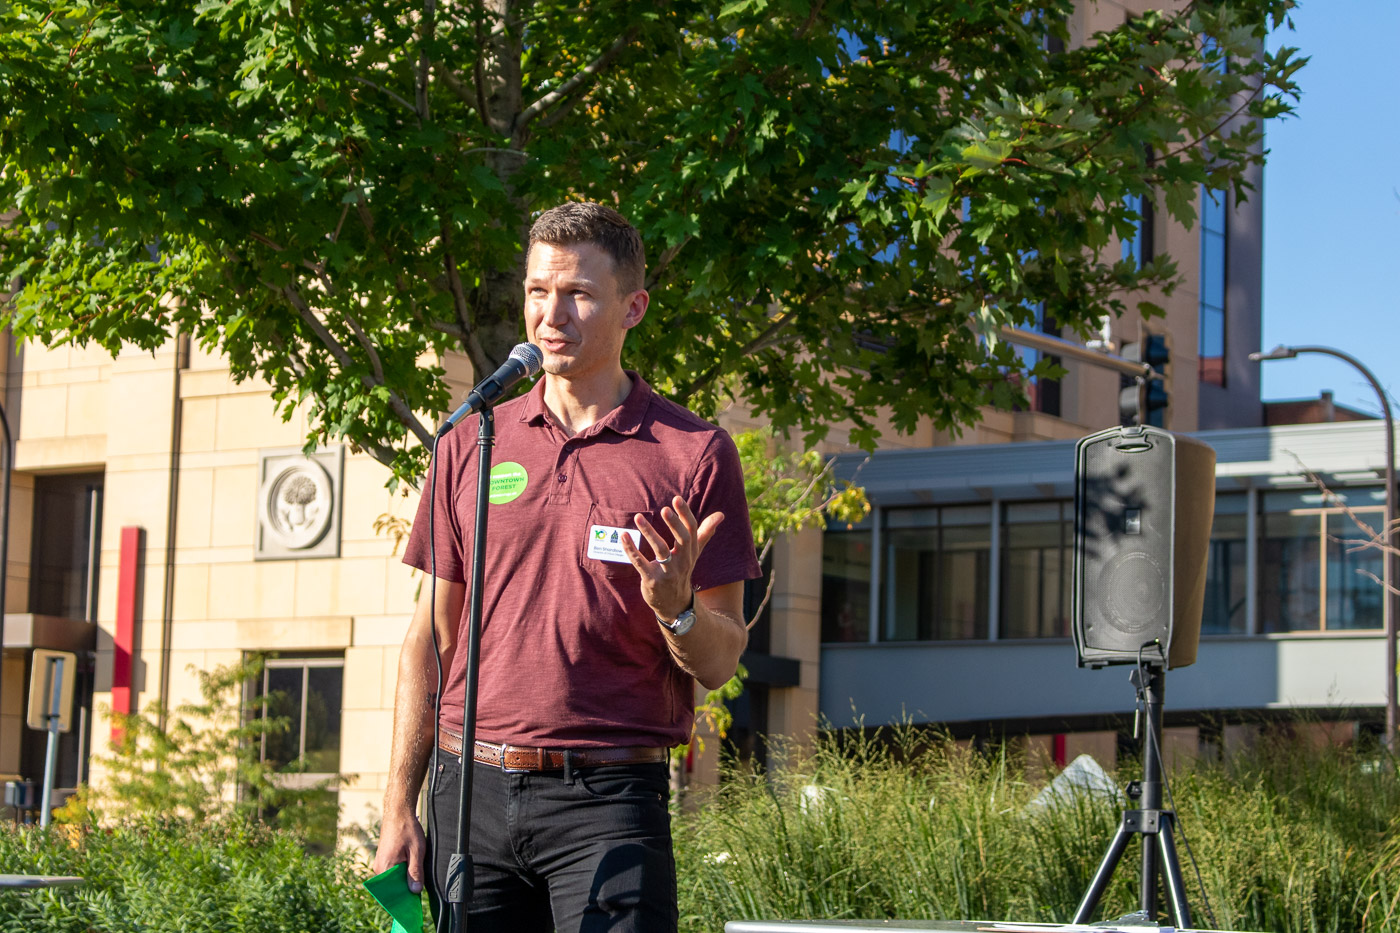 Ben Shardlow speaking in front of a microphone outdoors at an event.